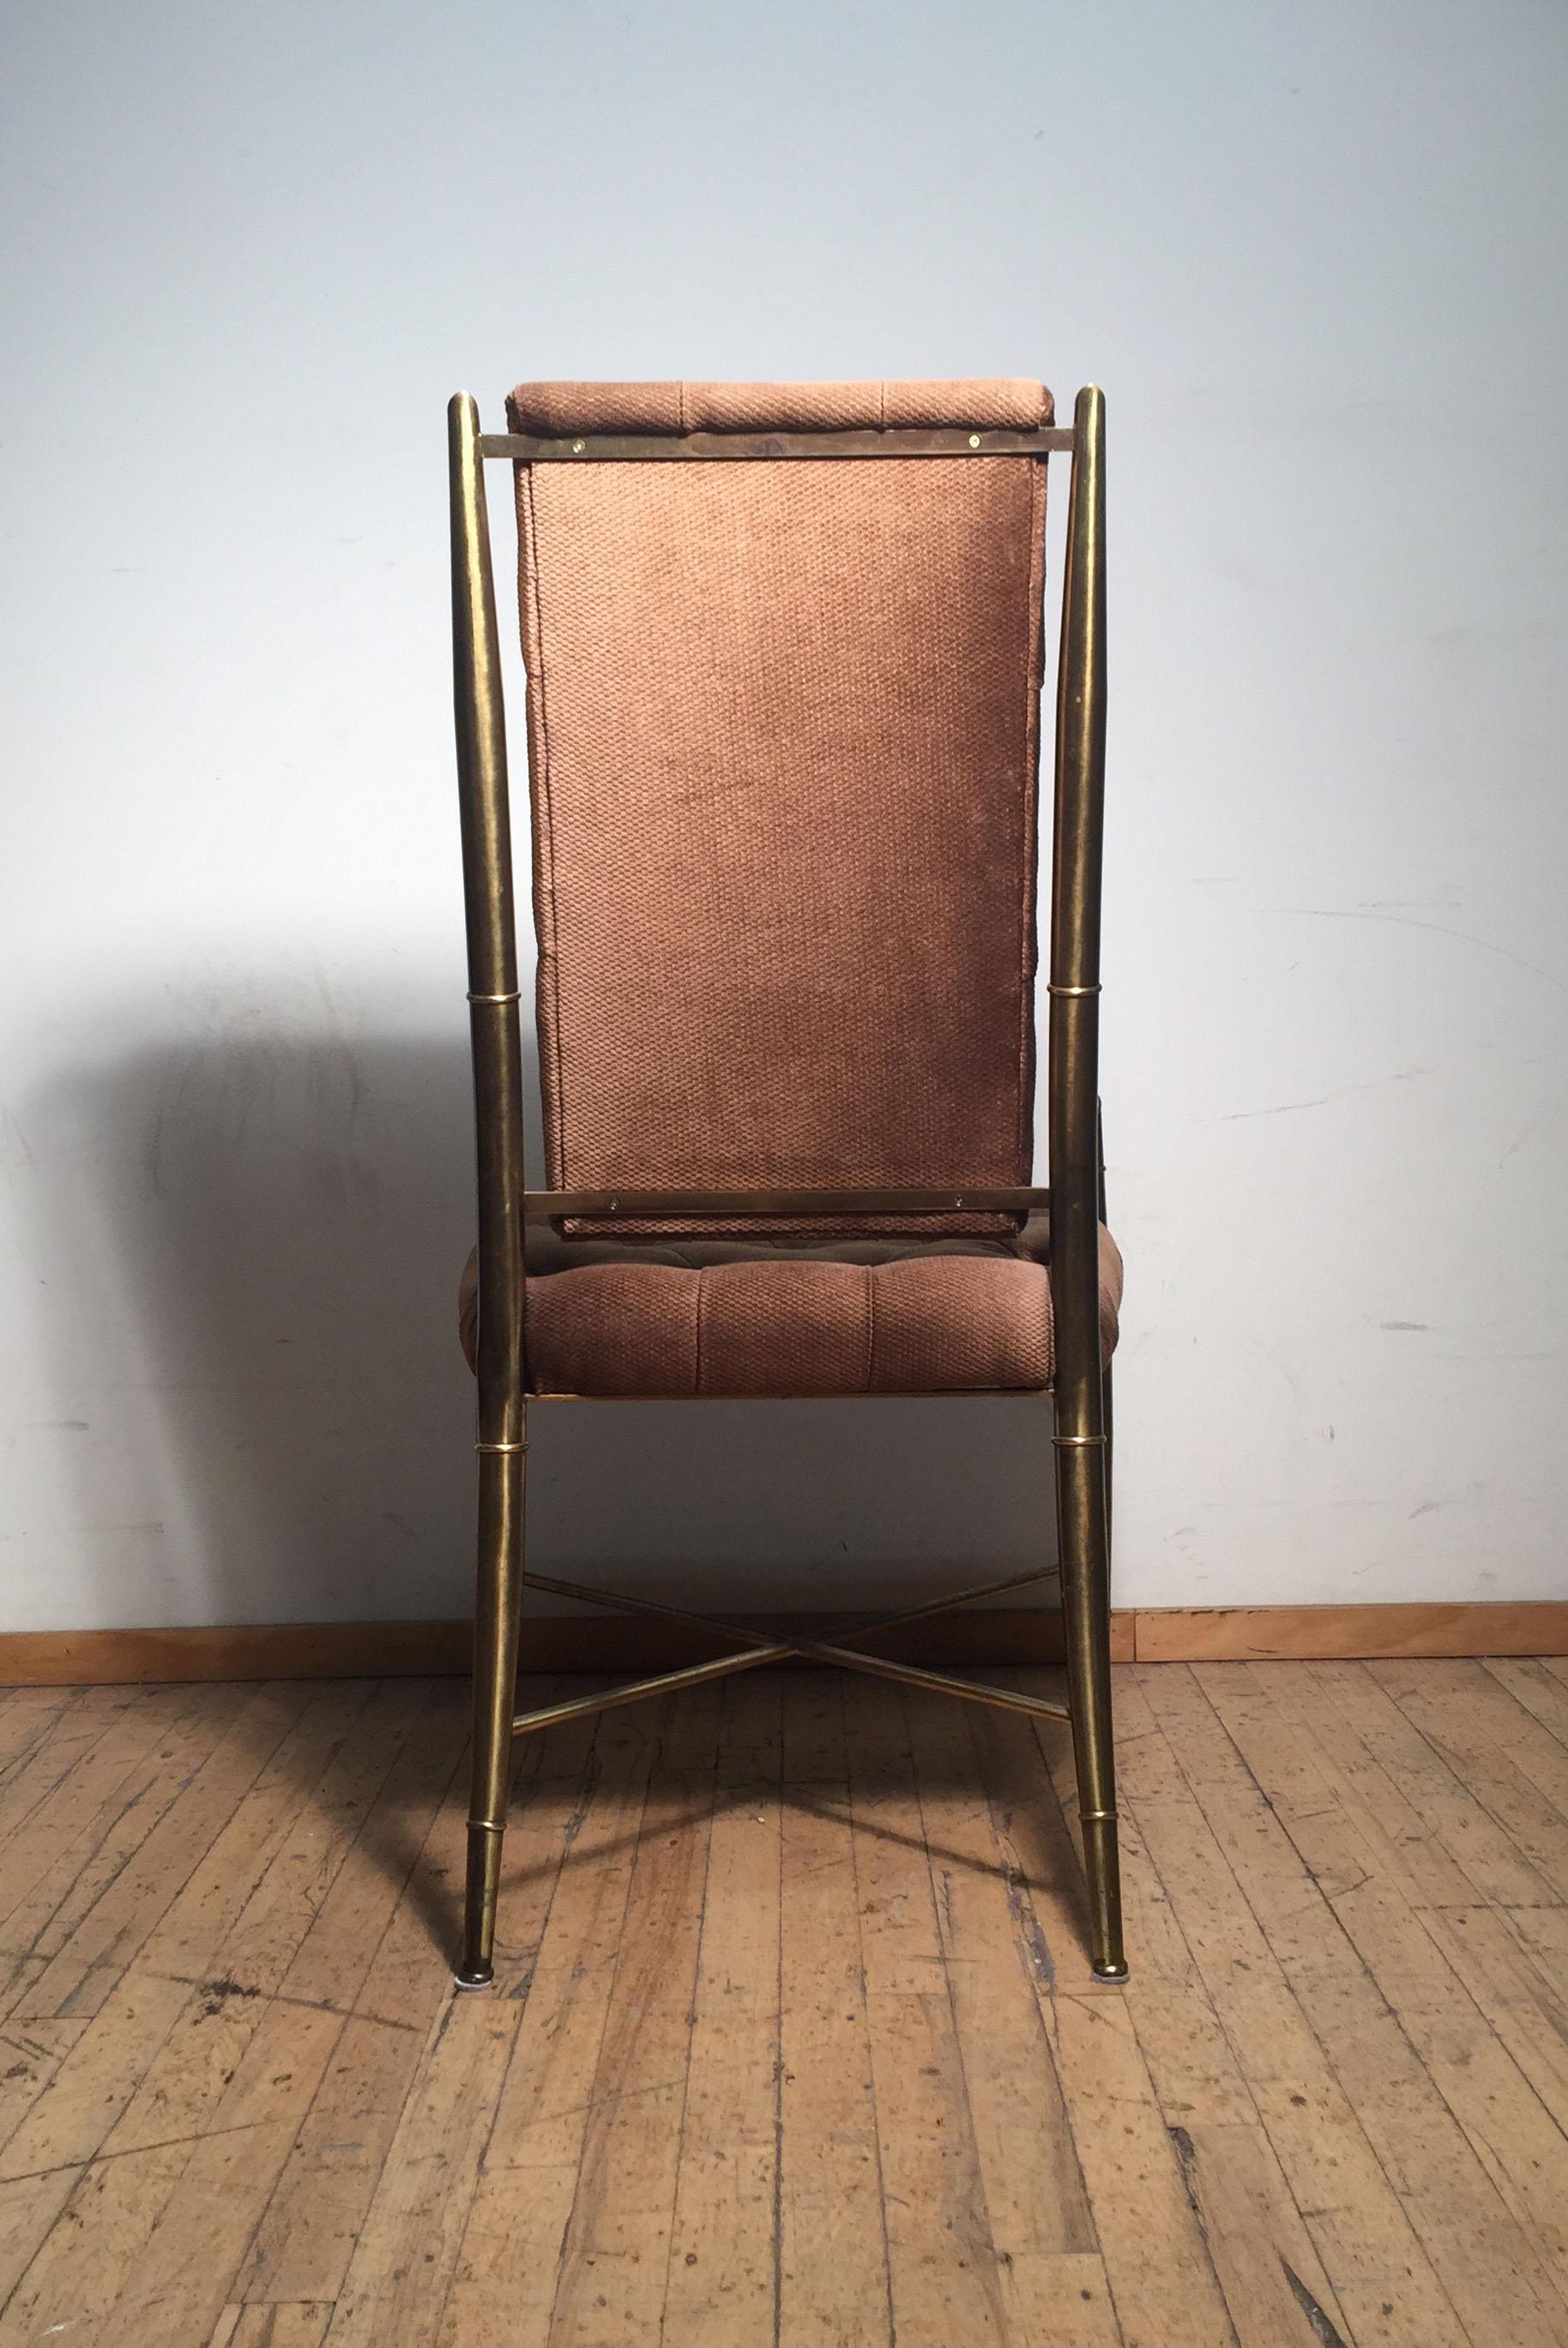 20th Century Six Mastercraft Brass Bamboo Imperial Dining Chairs, Italy - 12 available For Sale